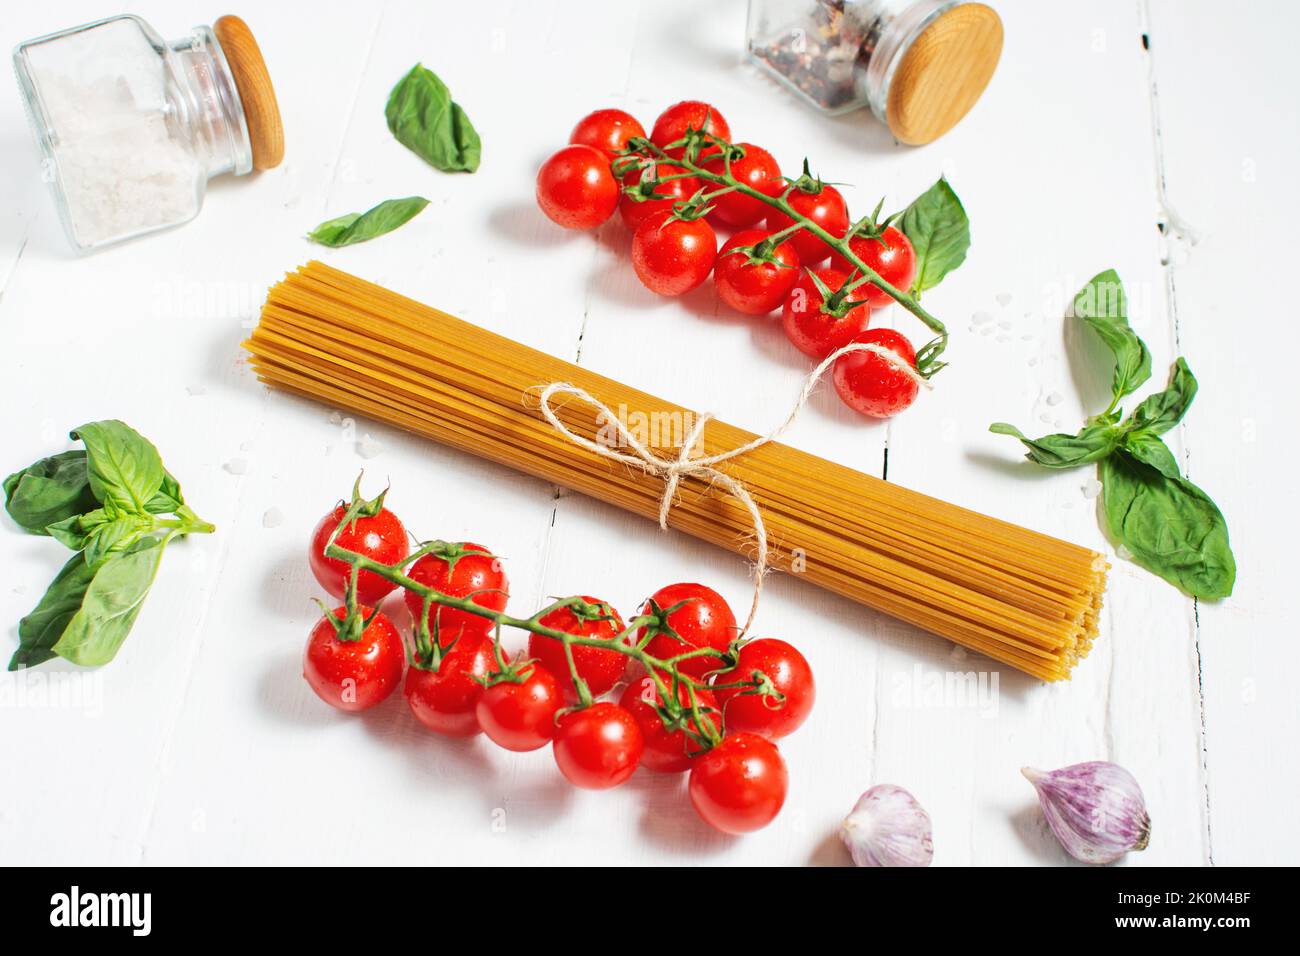 Spaghetti, basil and tomatoes isolated on a white wooden table. Stock Photo